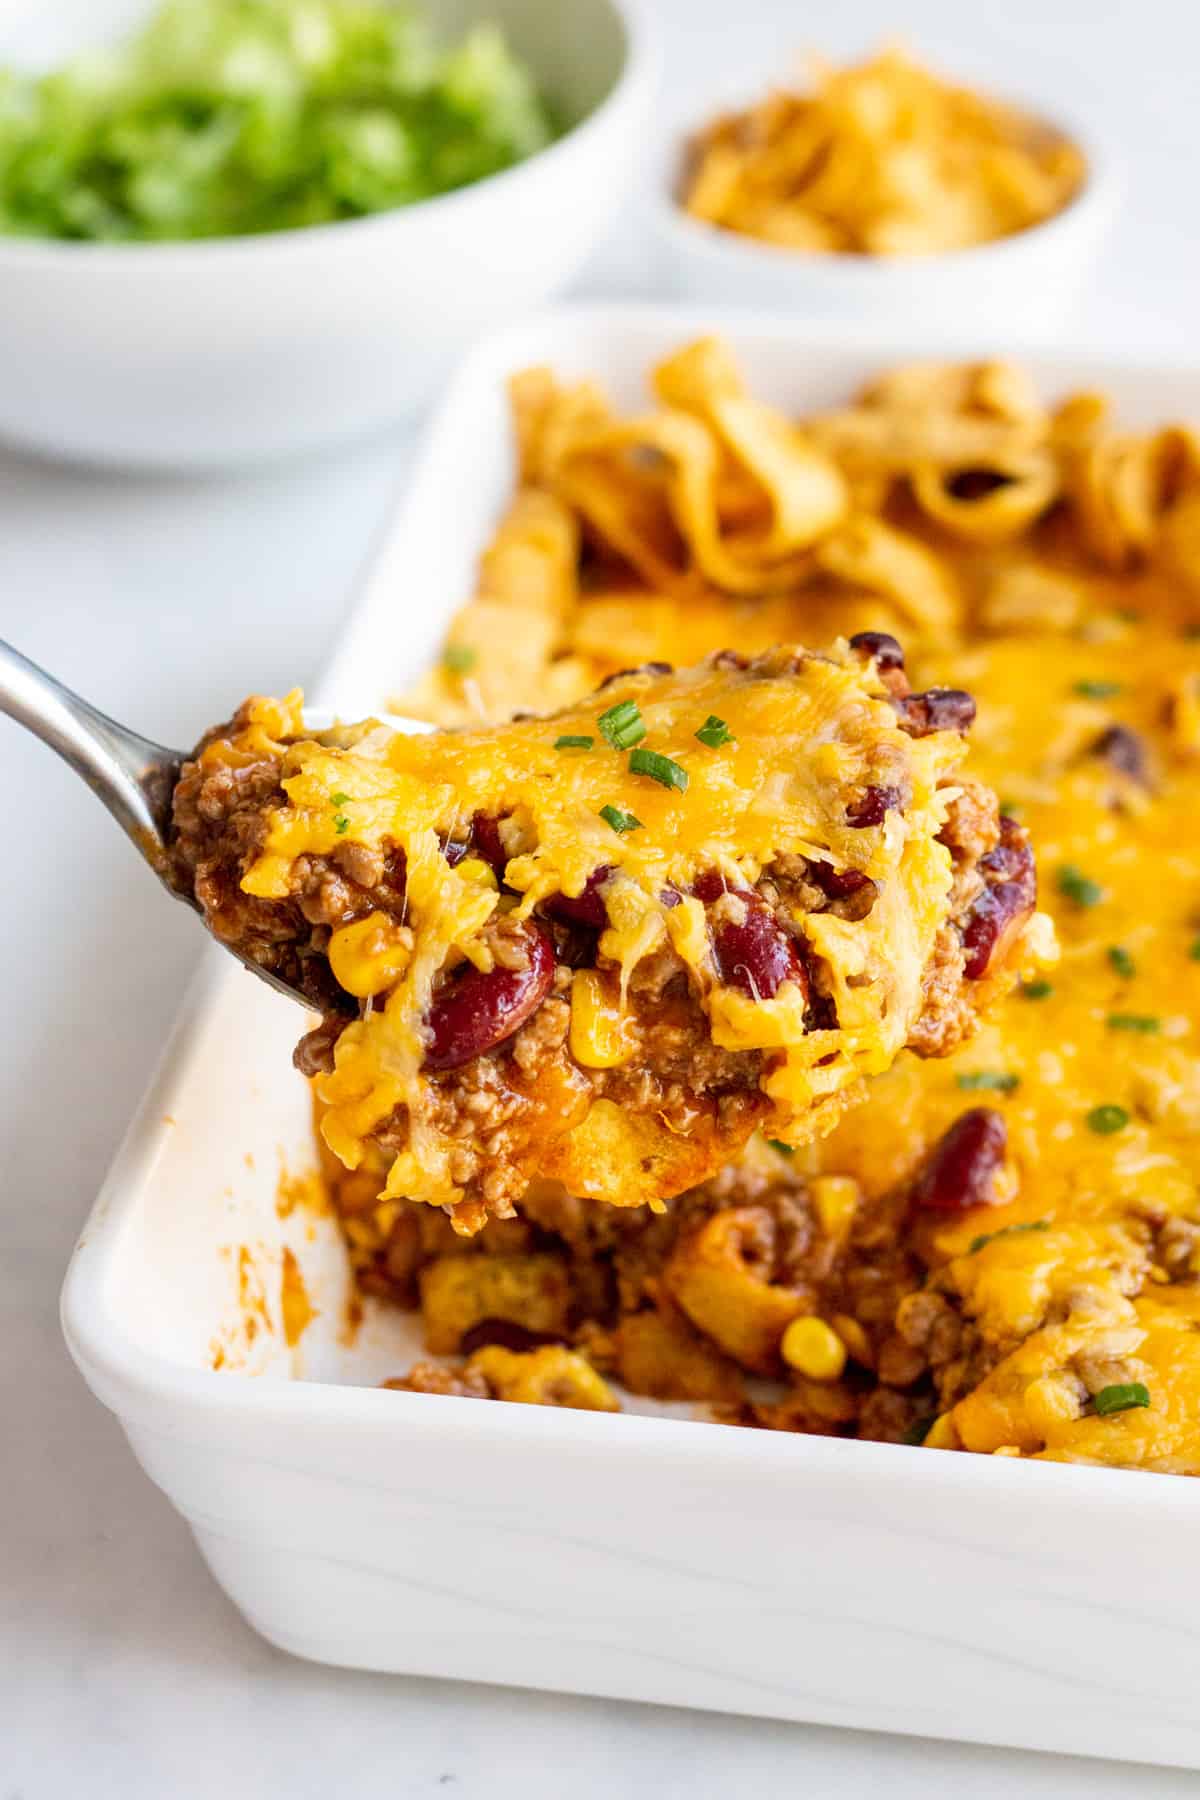 metal spoon scoop of frito pie from white casserole dish